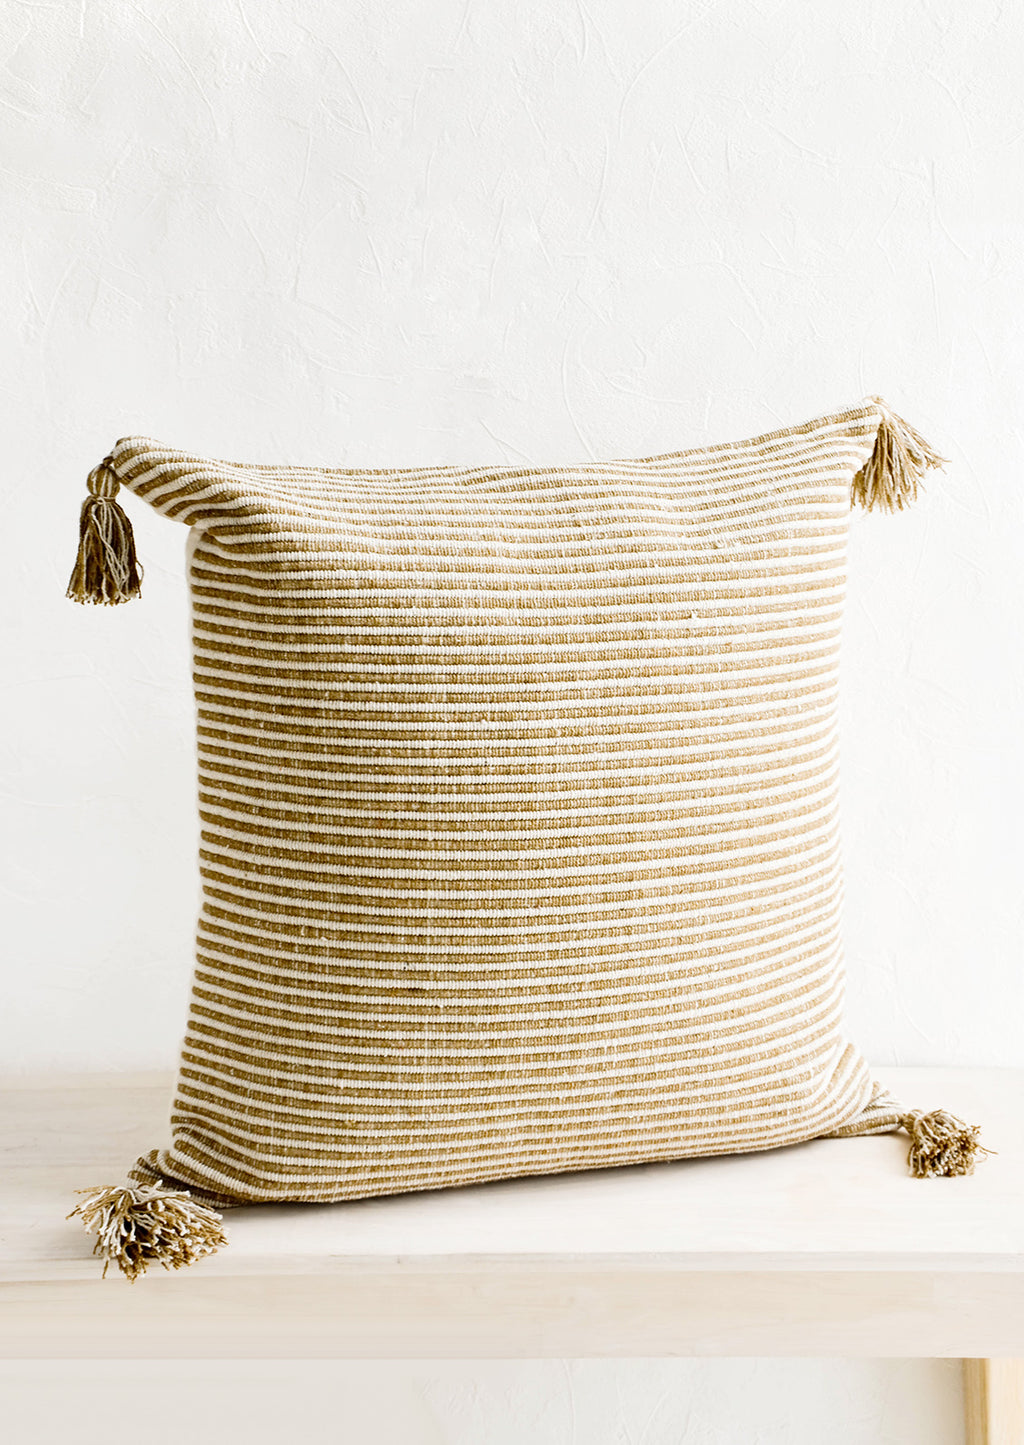 Light Brown: Large square throw pillow in textured light brown and cream stripes, decorative tassel at each corner